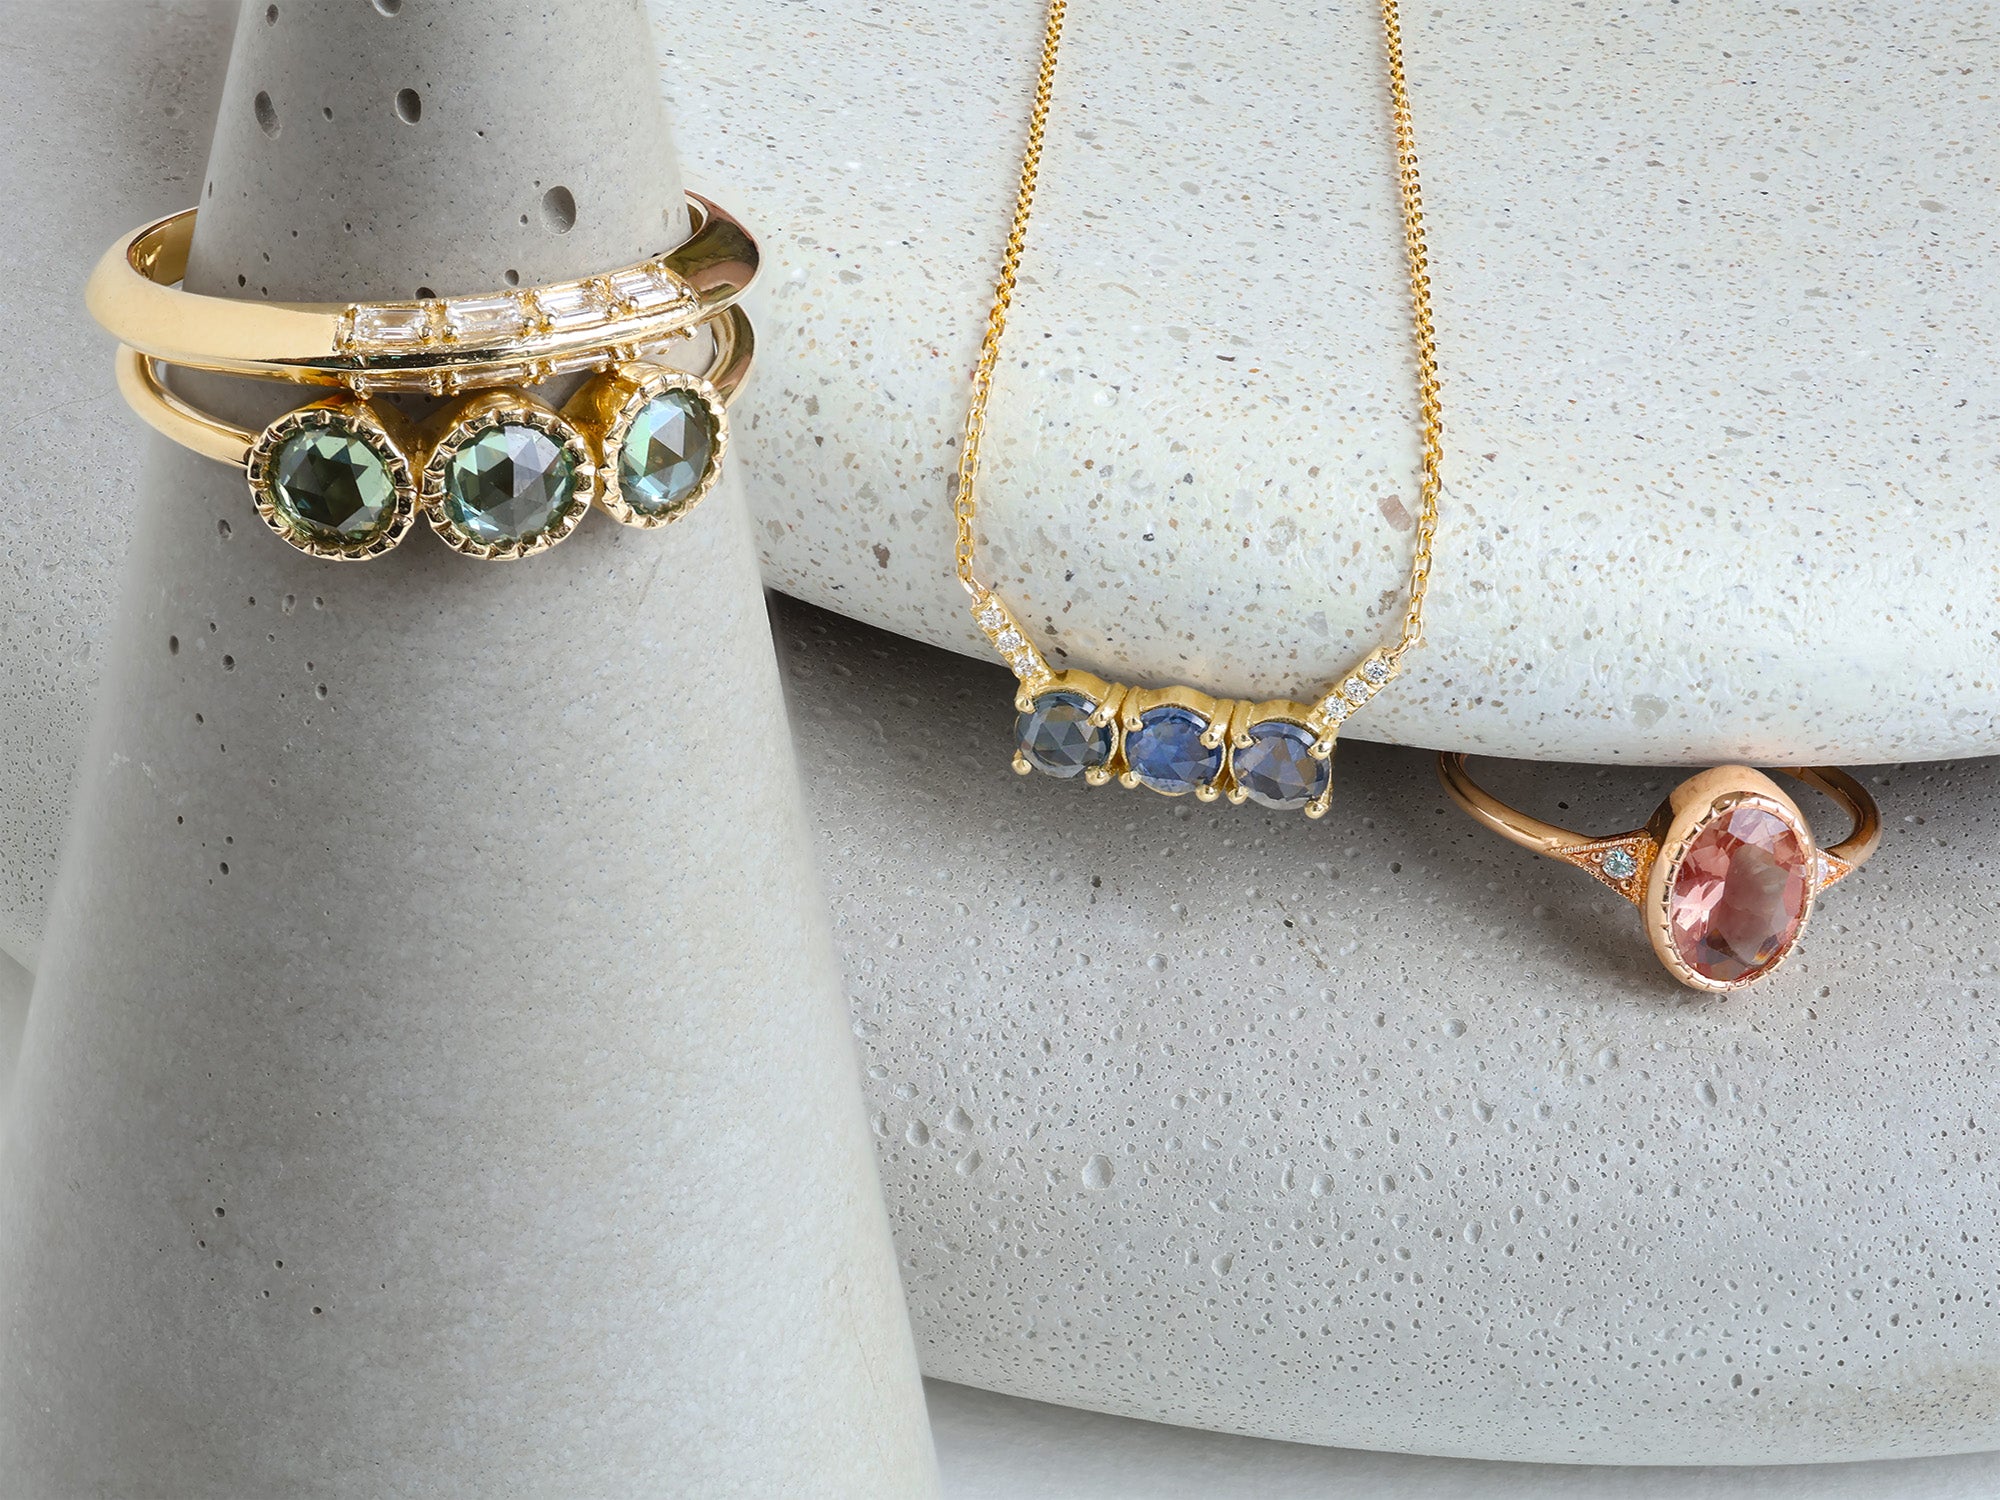 Gold jewelry with a a mixture of colored stones displayed on grey stones.